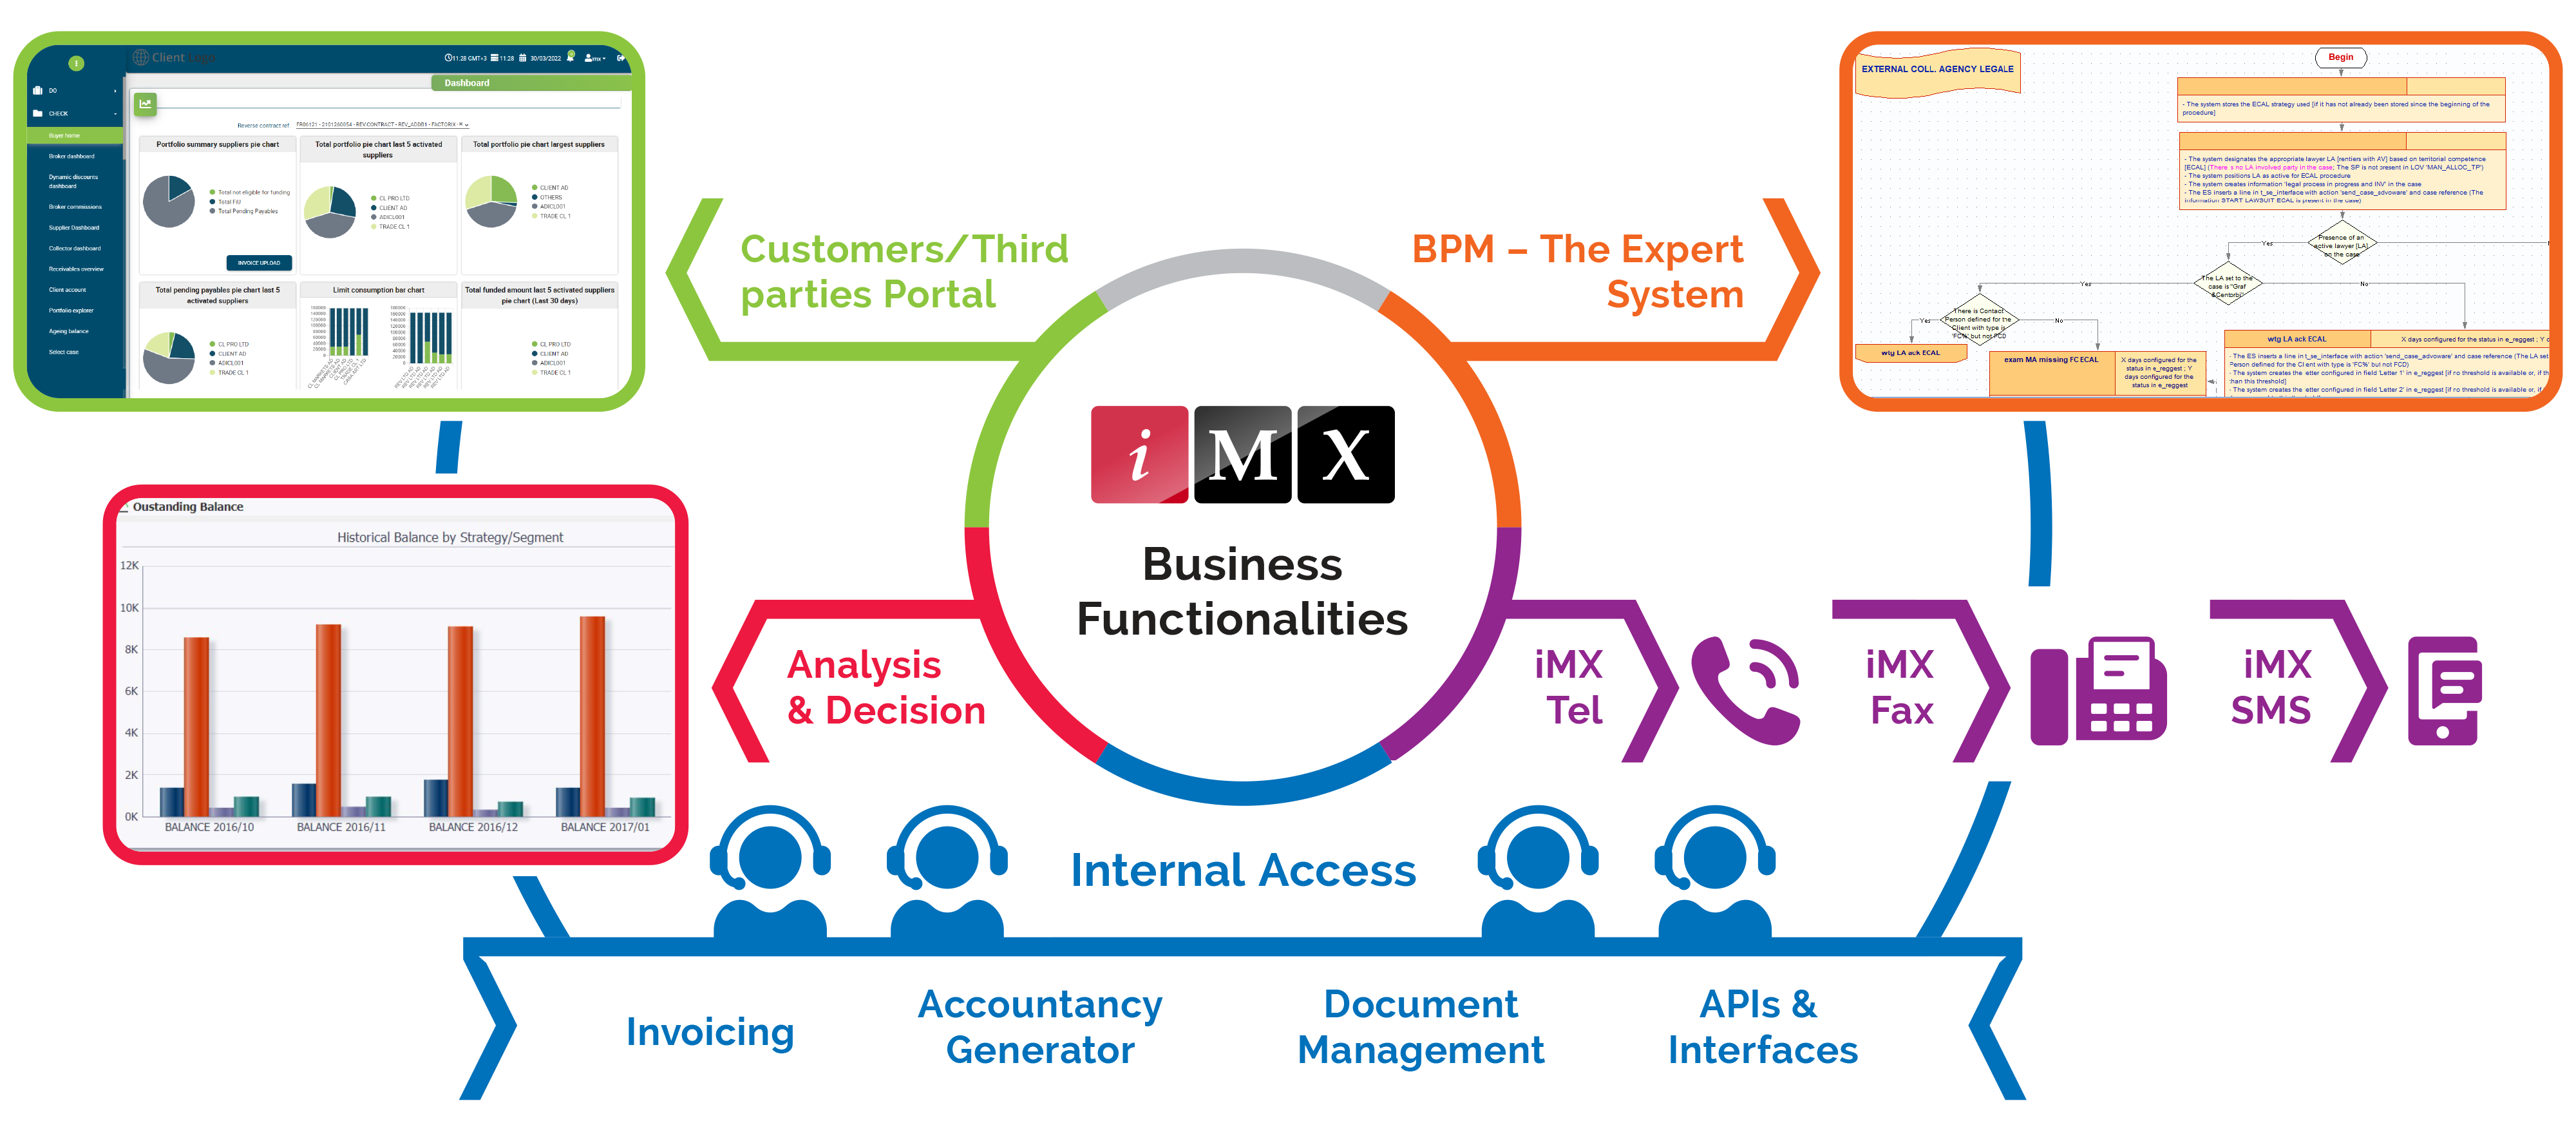 iMX - The All-in-one Software Solution